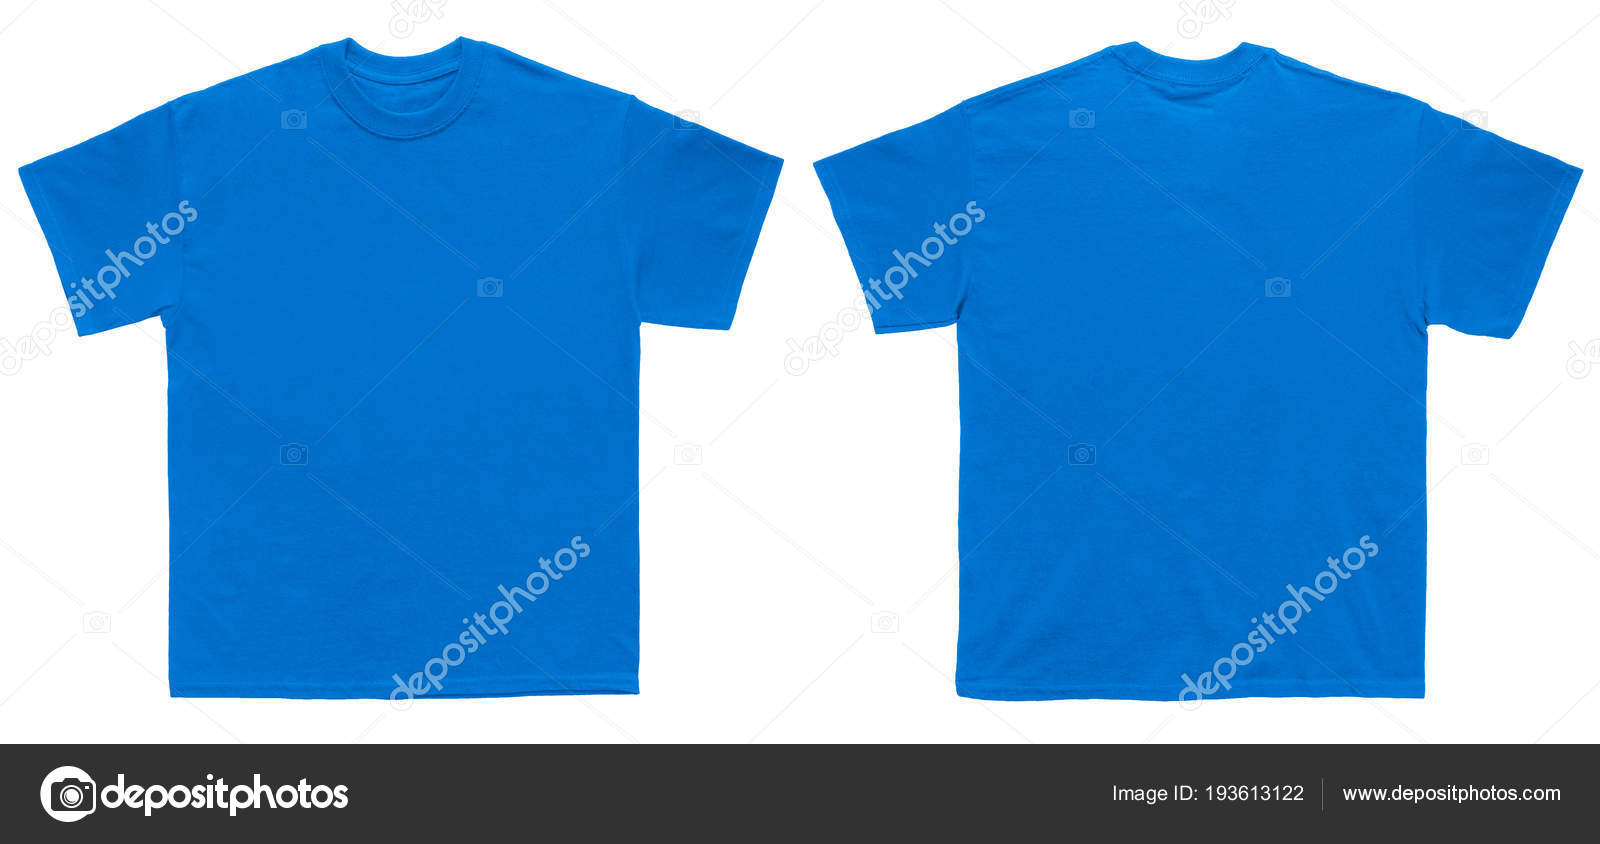 Download Images: royal blue t shirt template | Blank Shirt Color Royal Blue Template Front Back View ...